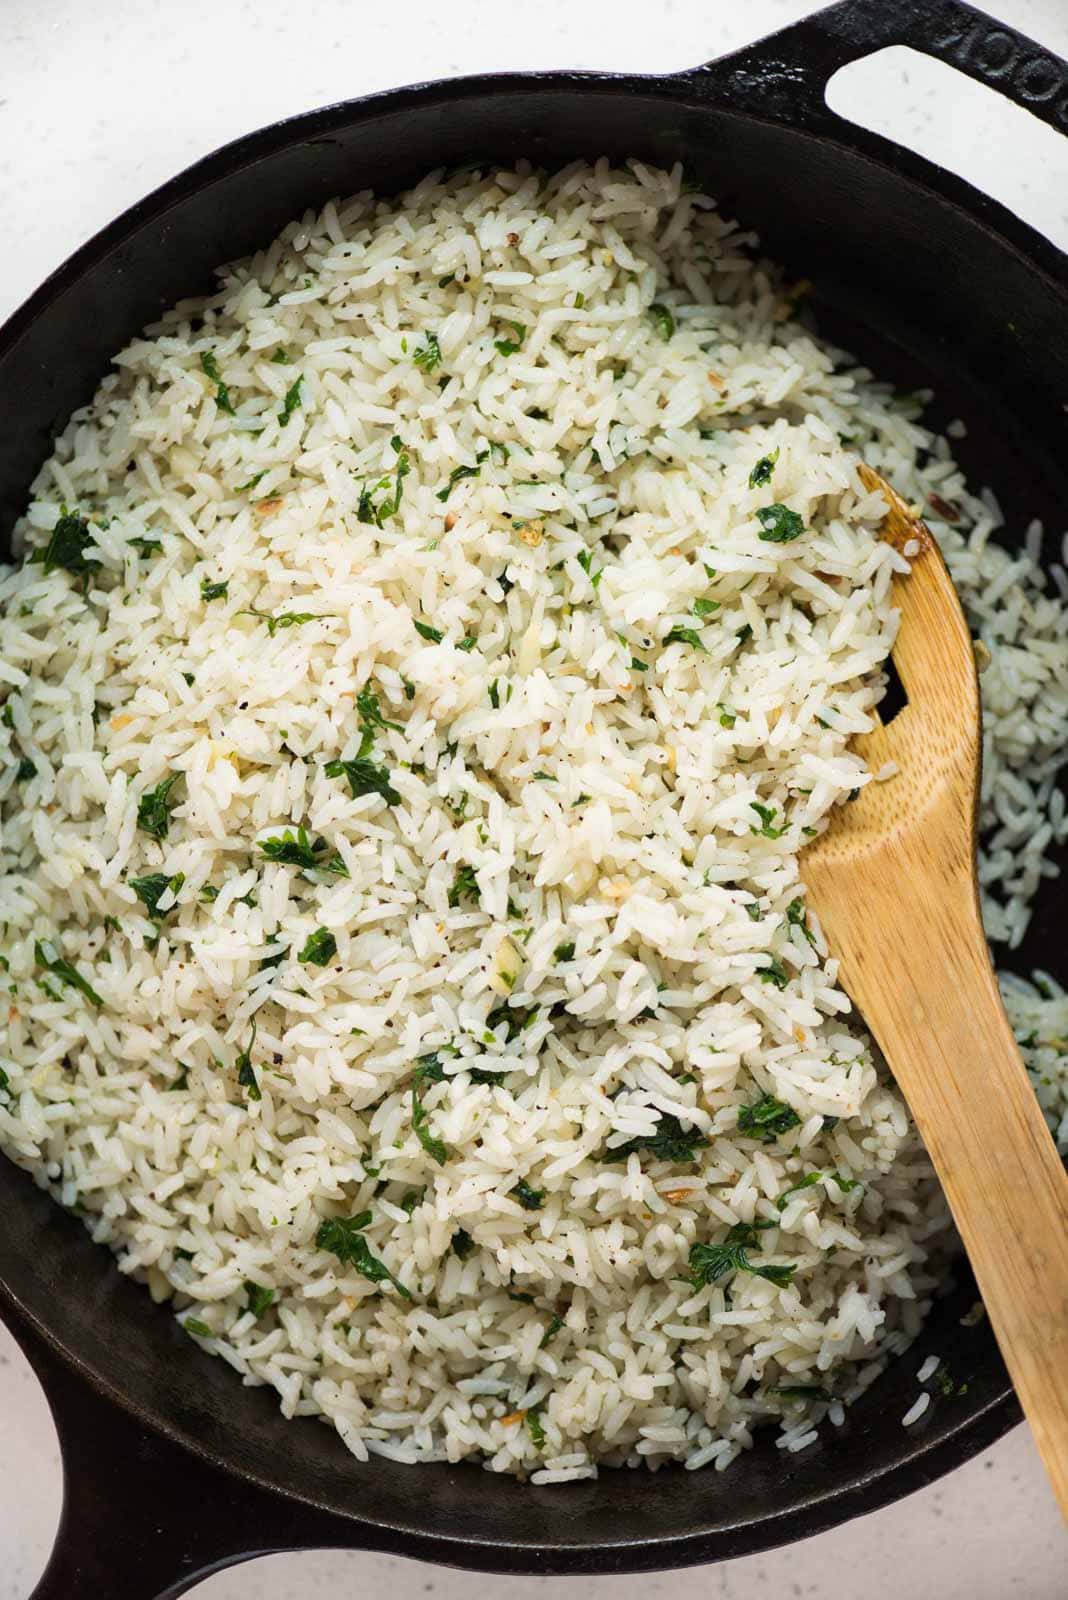 Garlic butter rice with a subtle flavor from parsley, this is a perfect side dish to serve. The rice is perfectly seasoned and smells heavenly of garlic butter. 